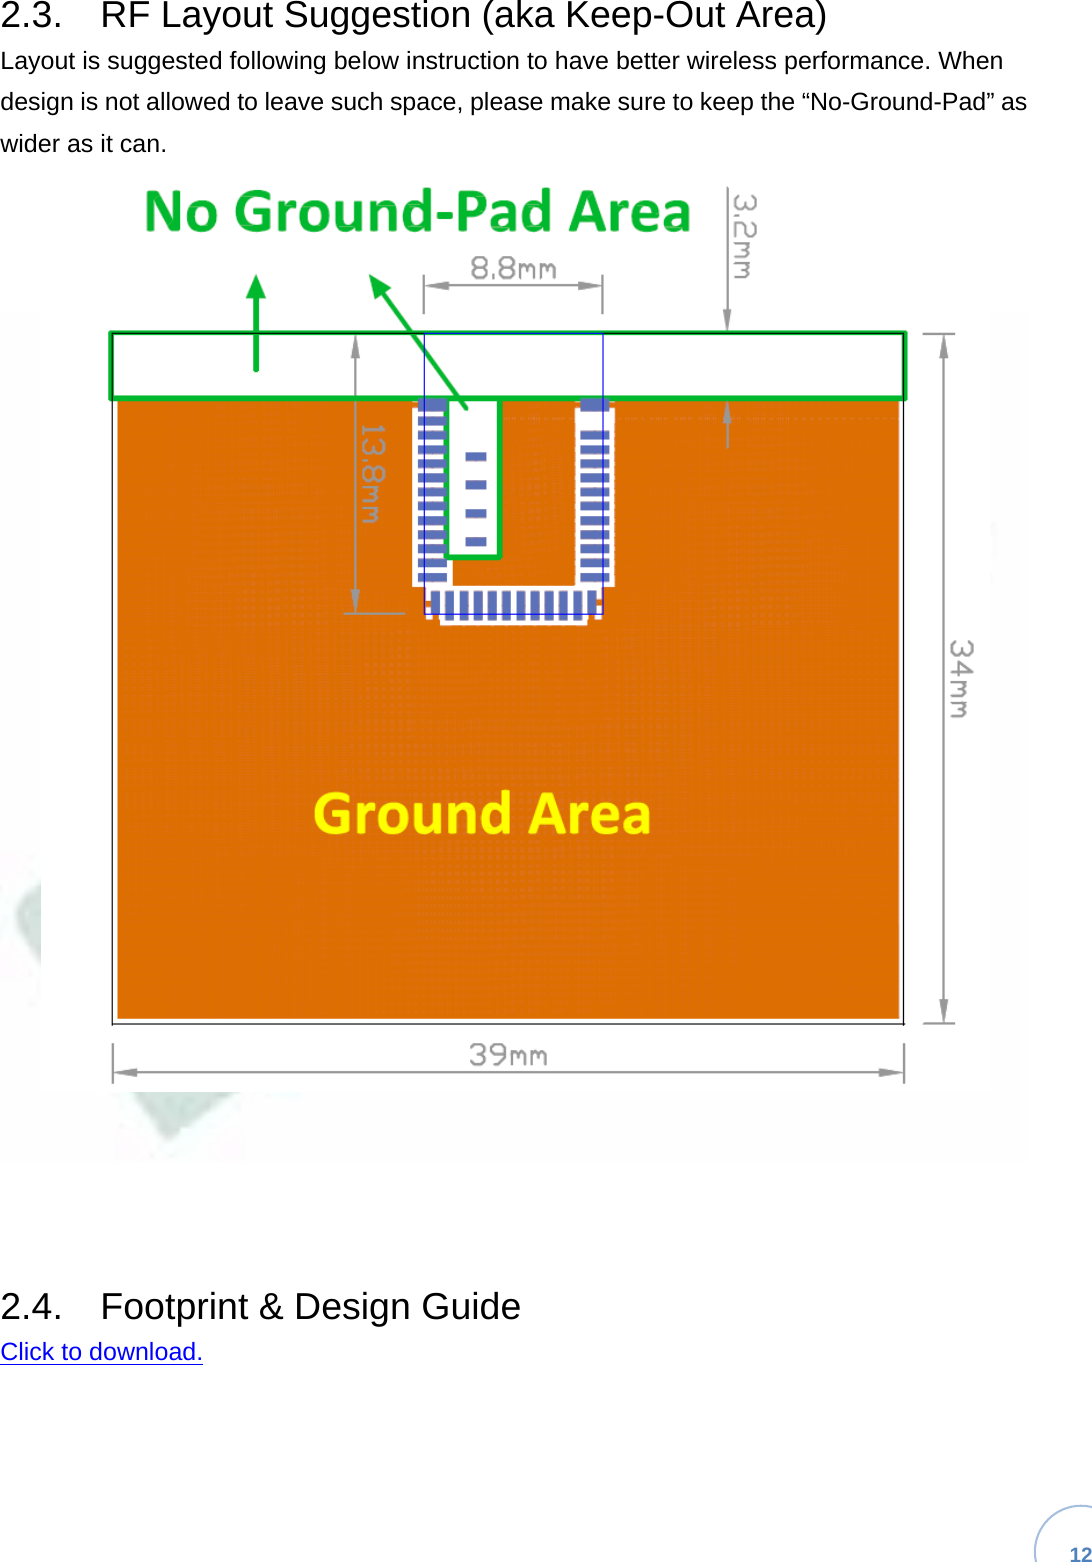   12 2.3.  RF Layout Suggestion (aka Keep-Out Area)Layout is suggested following below instruction to have better wireless performance. When design is not allowed to leave such space, please make sure to keep the “No-Ground-Pad” as wider as it can.2.4.  Footprint &amp; Design GuideClick to download.